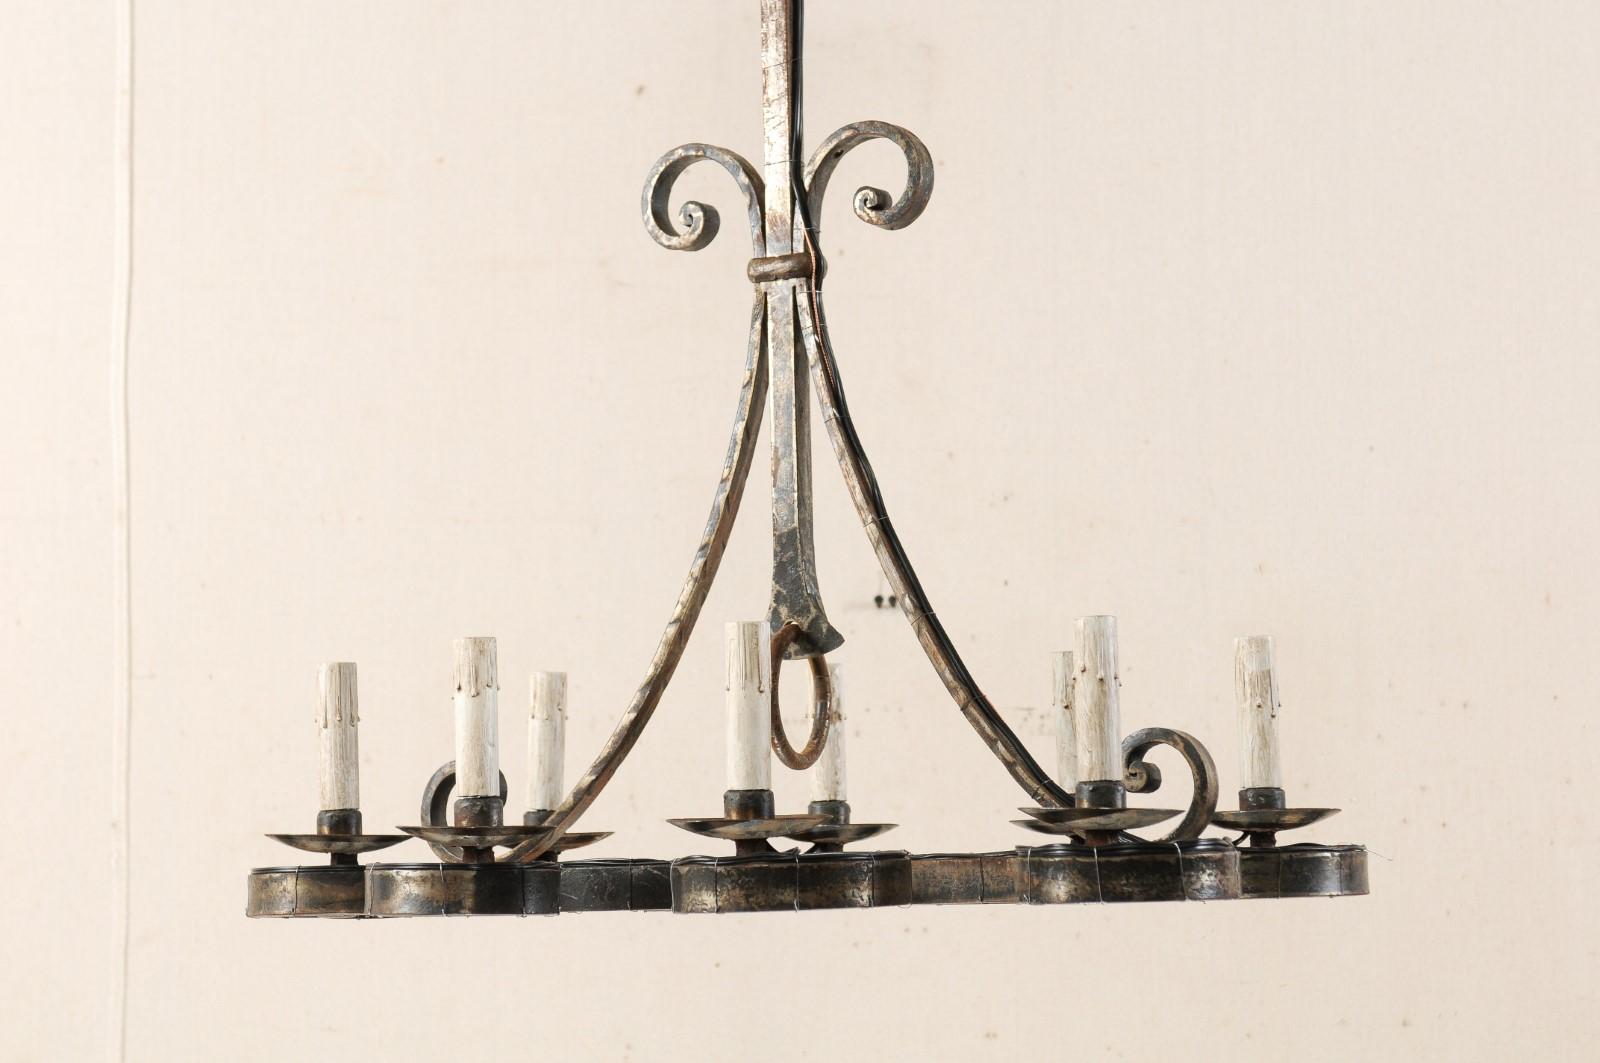 Lovely French Midcentury Forged-Iron Chandelier with C-Scrolls In Good Condition For Sale In Atlanta, GA